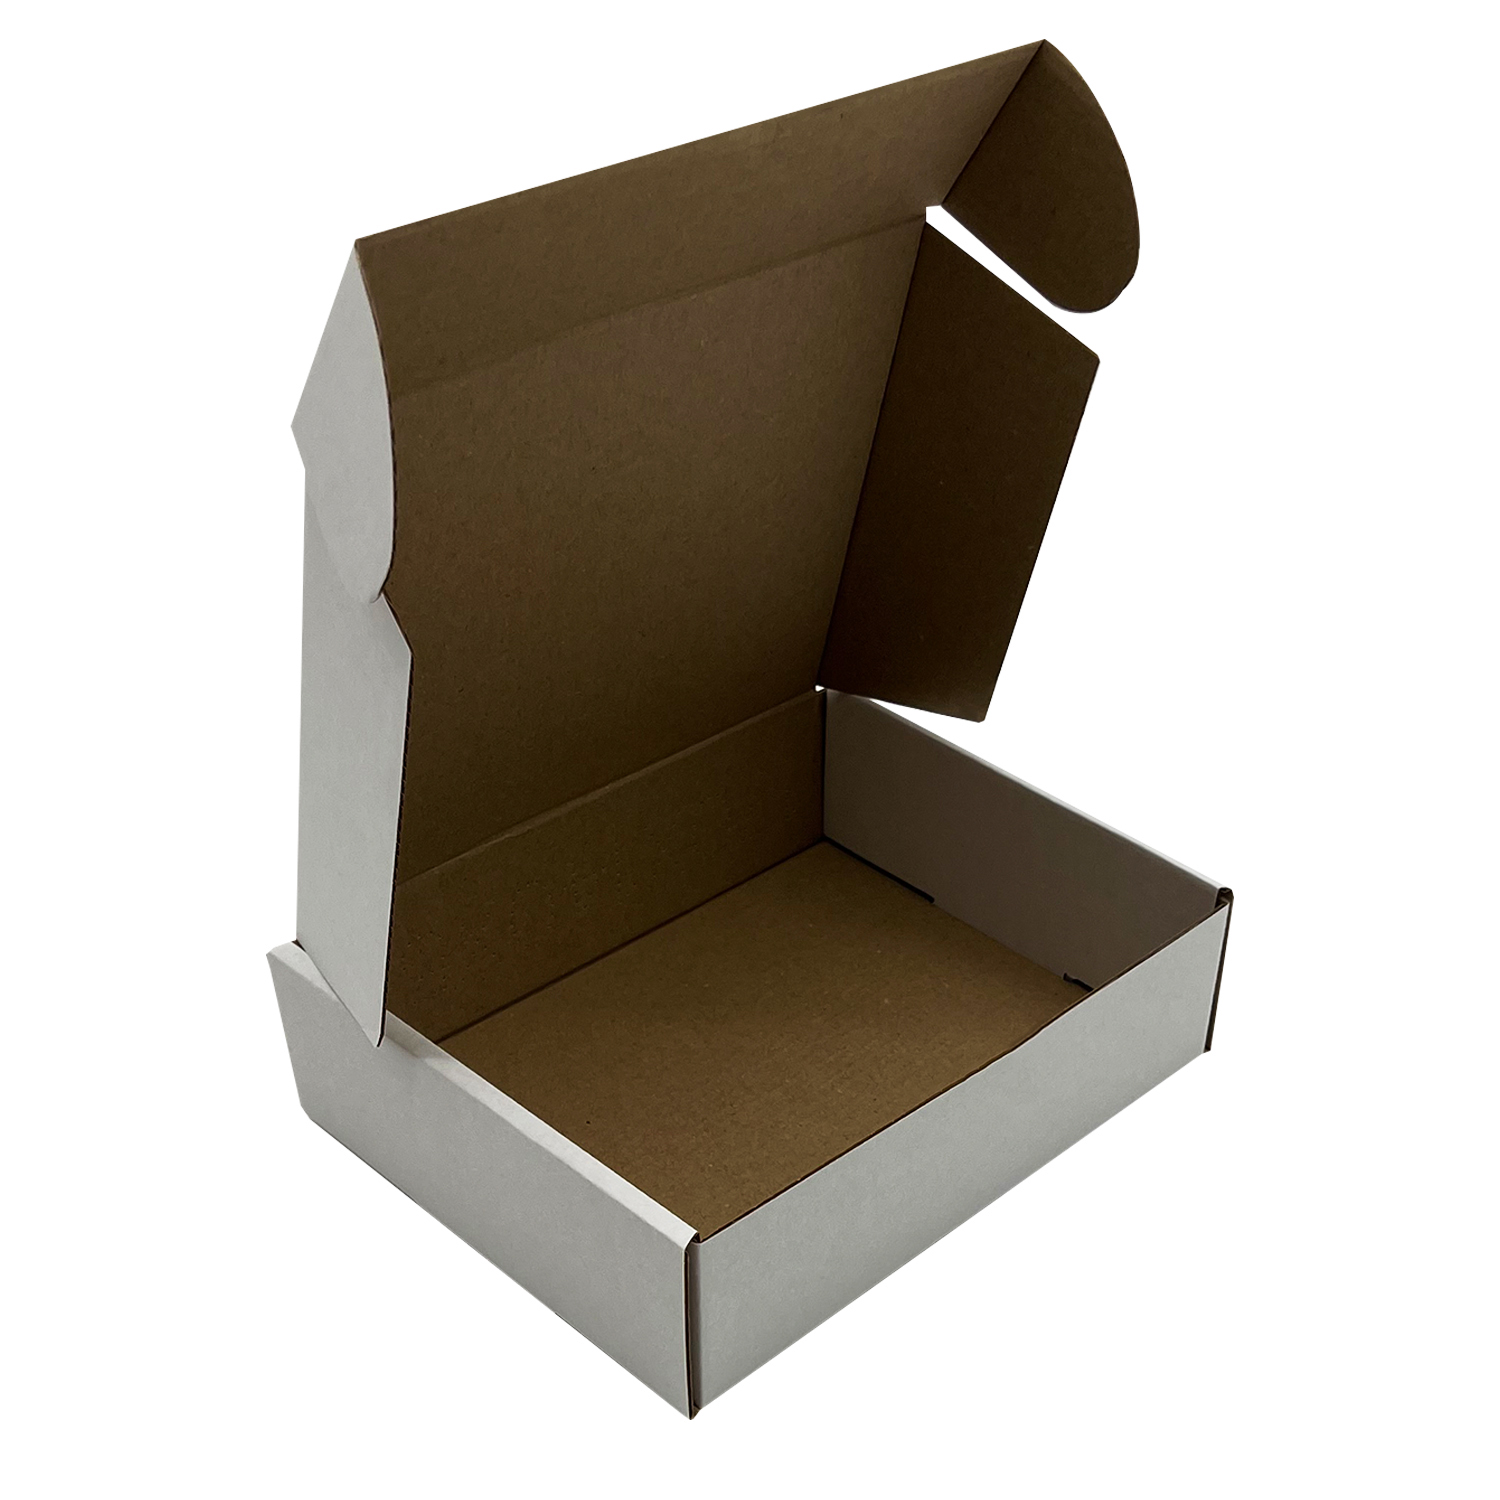 Small Parcel Postal Boxes – White (170mm x 140mm x 50mm)